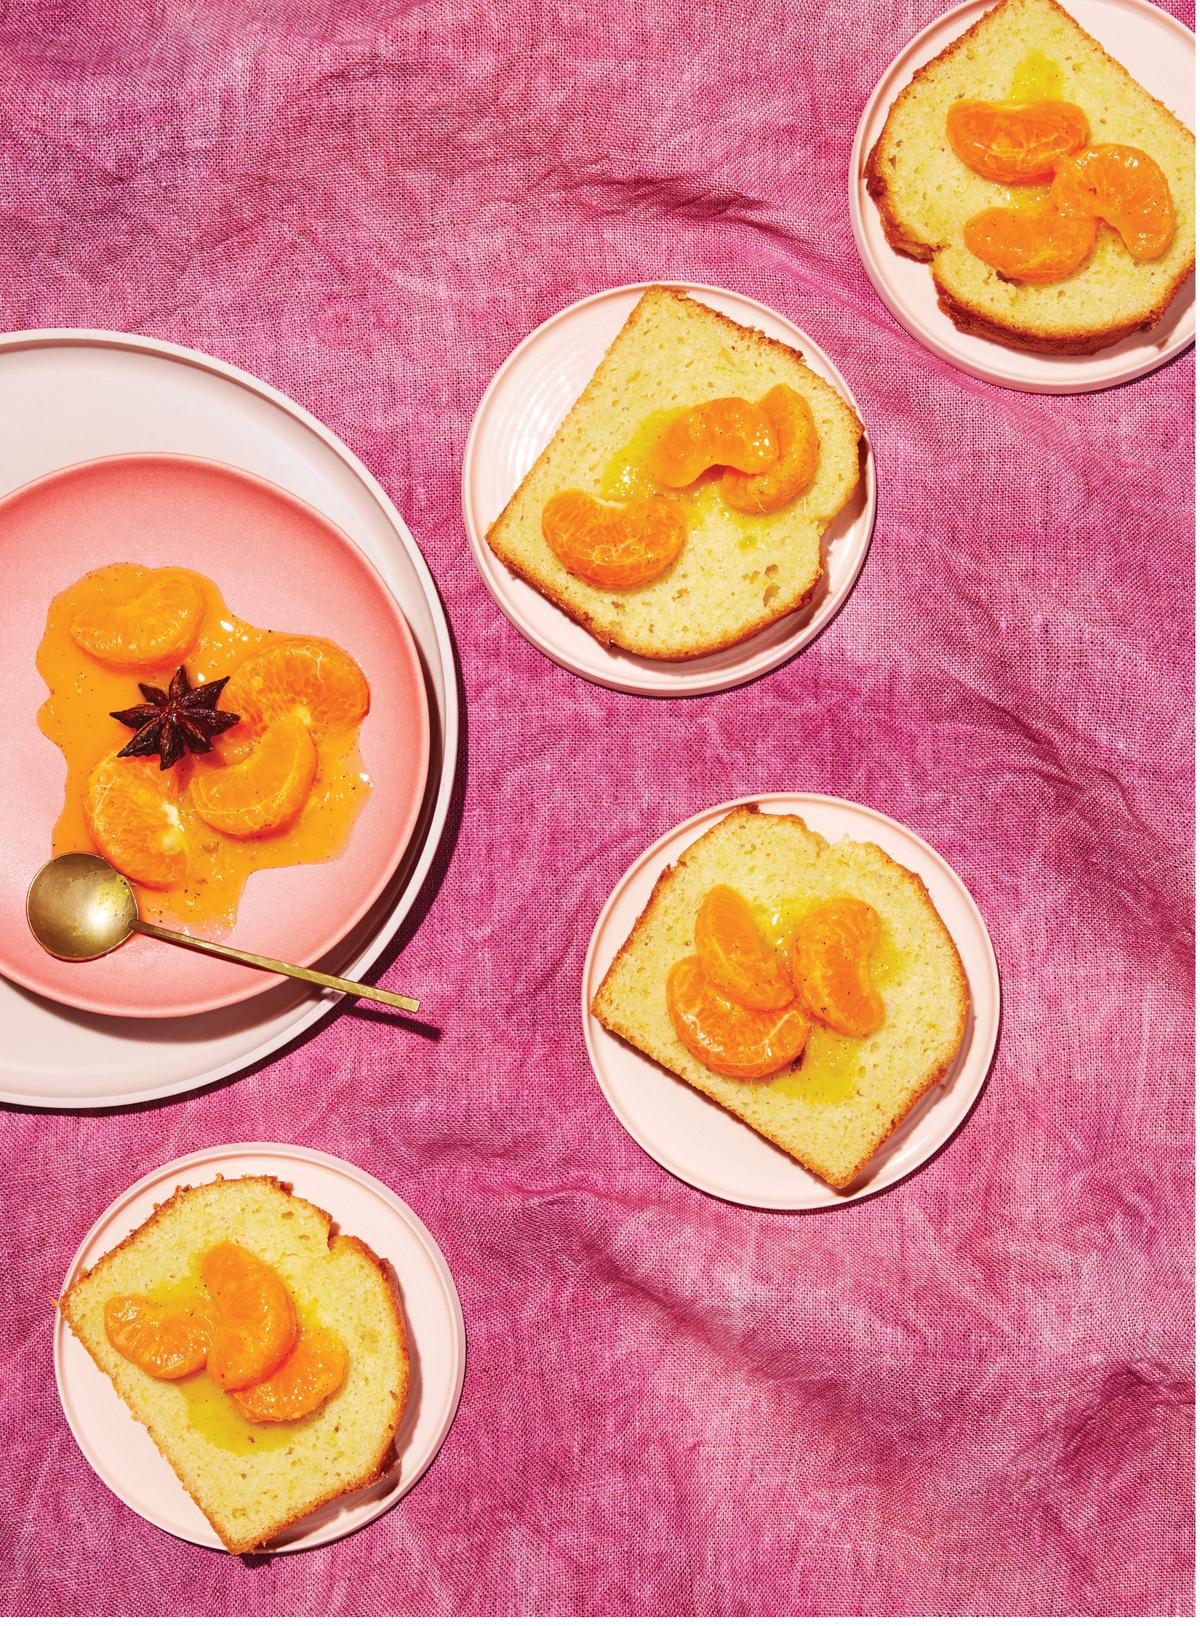 This polenta pound cake is spiked with orange zest and liqueur, and served with saucy spoonfuls of spiced mandarins. (Ethan Calabrese)